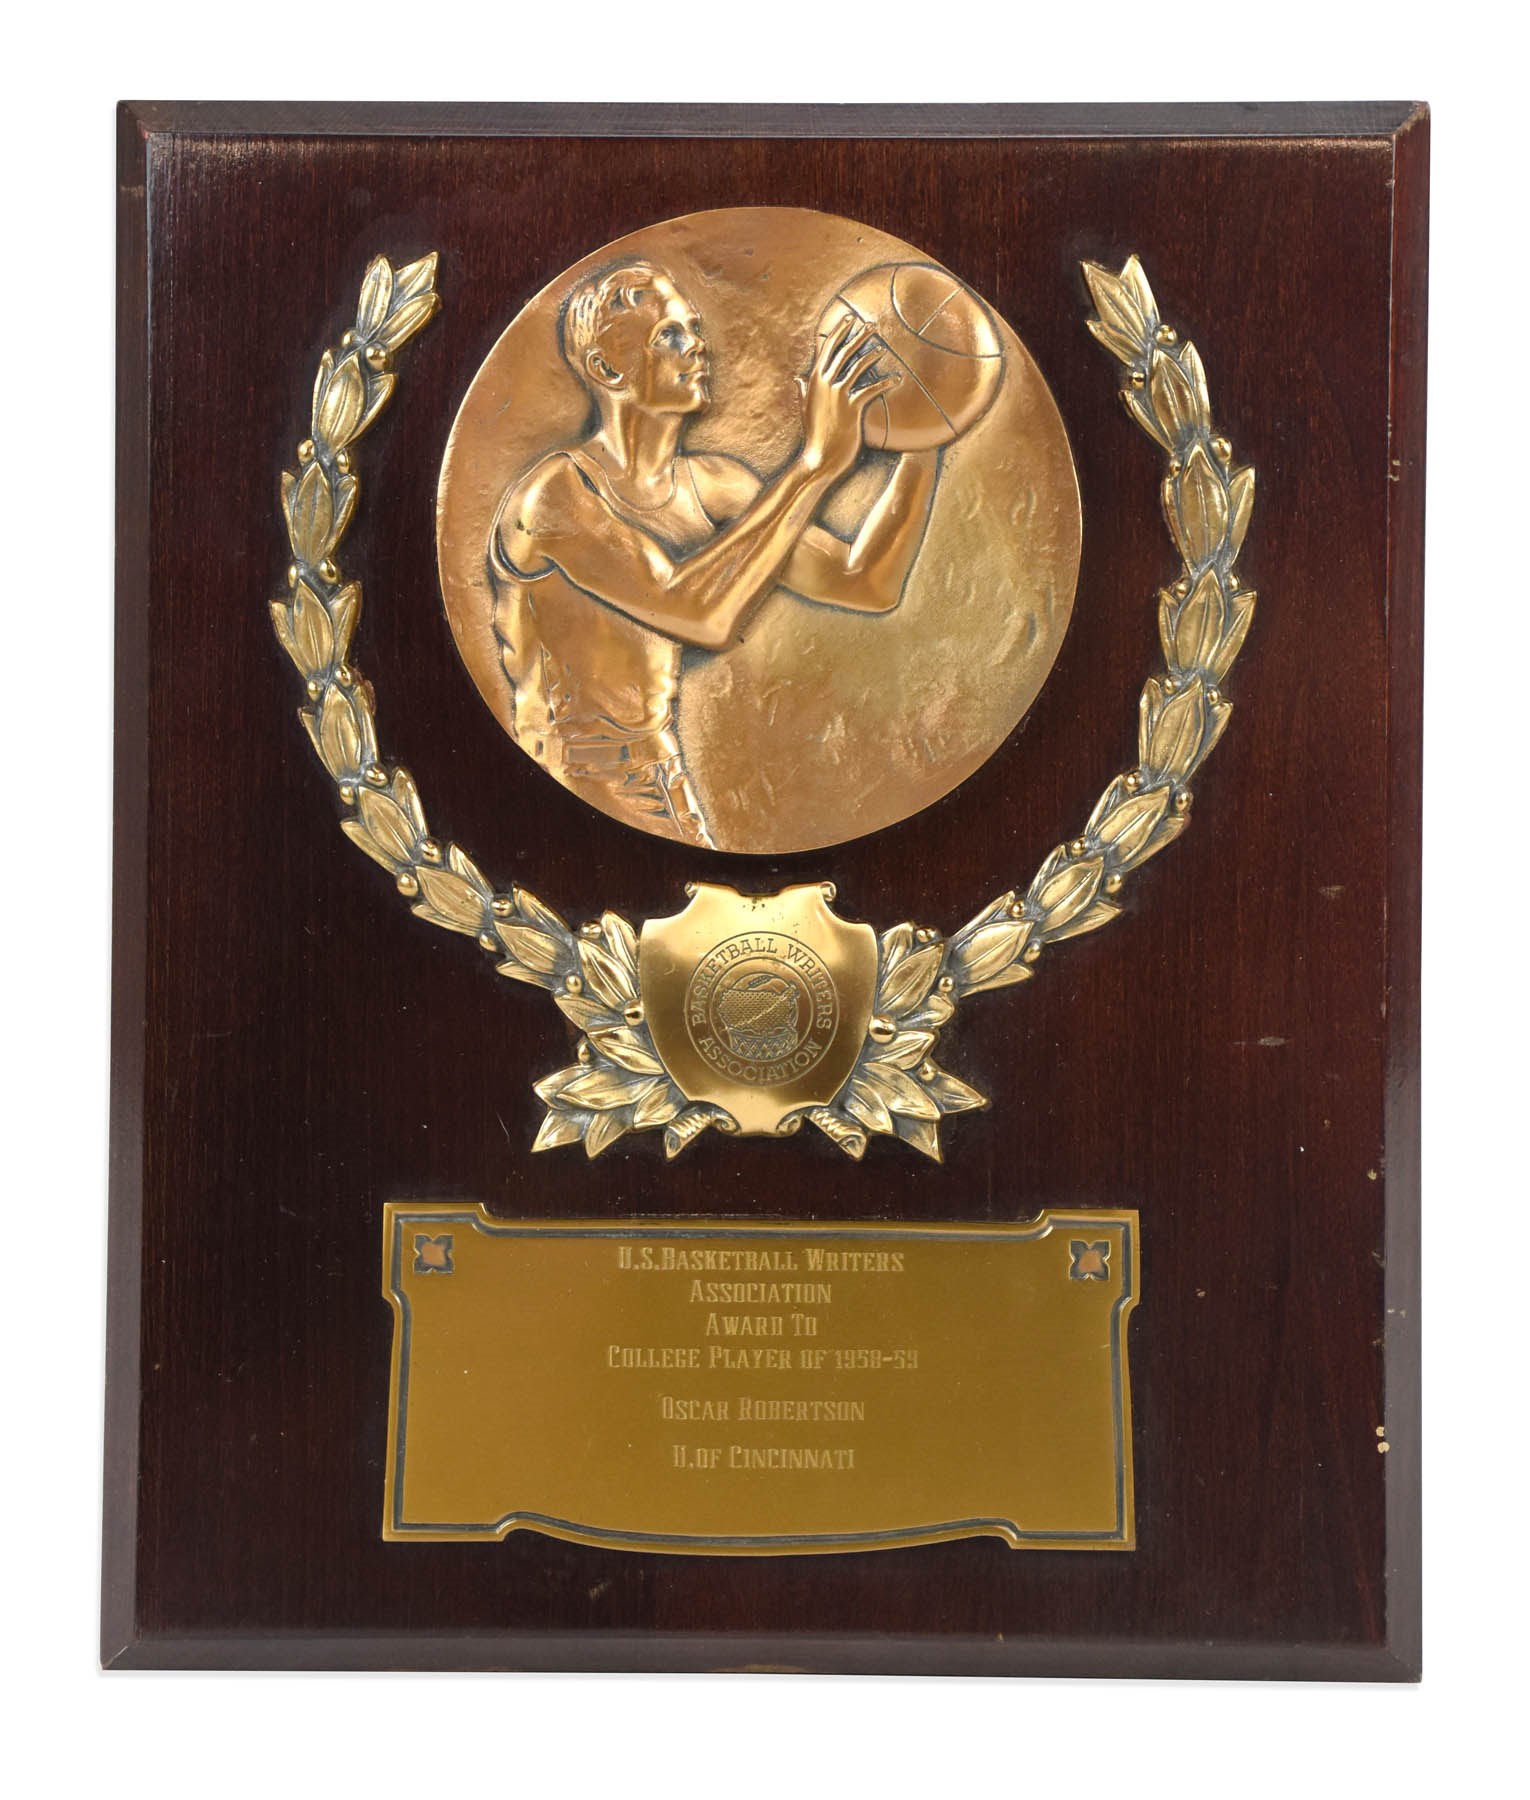 The Oscar Robertson Collection - 1958-59 Oscar Robertson College Player of the Year Award - First Ever!